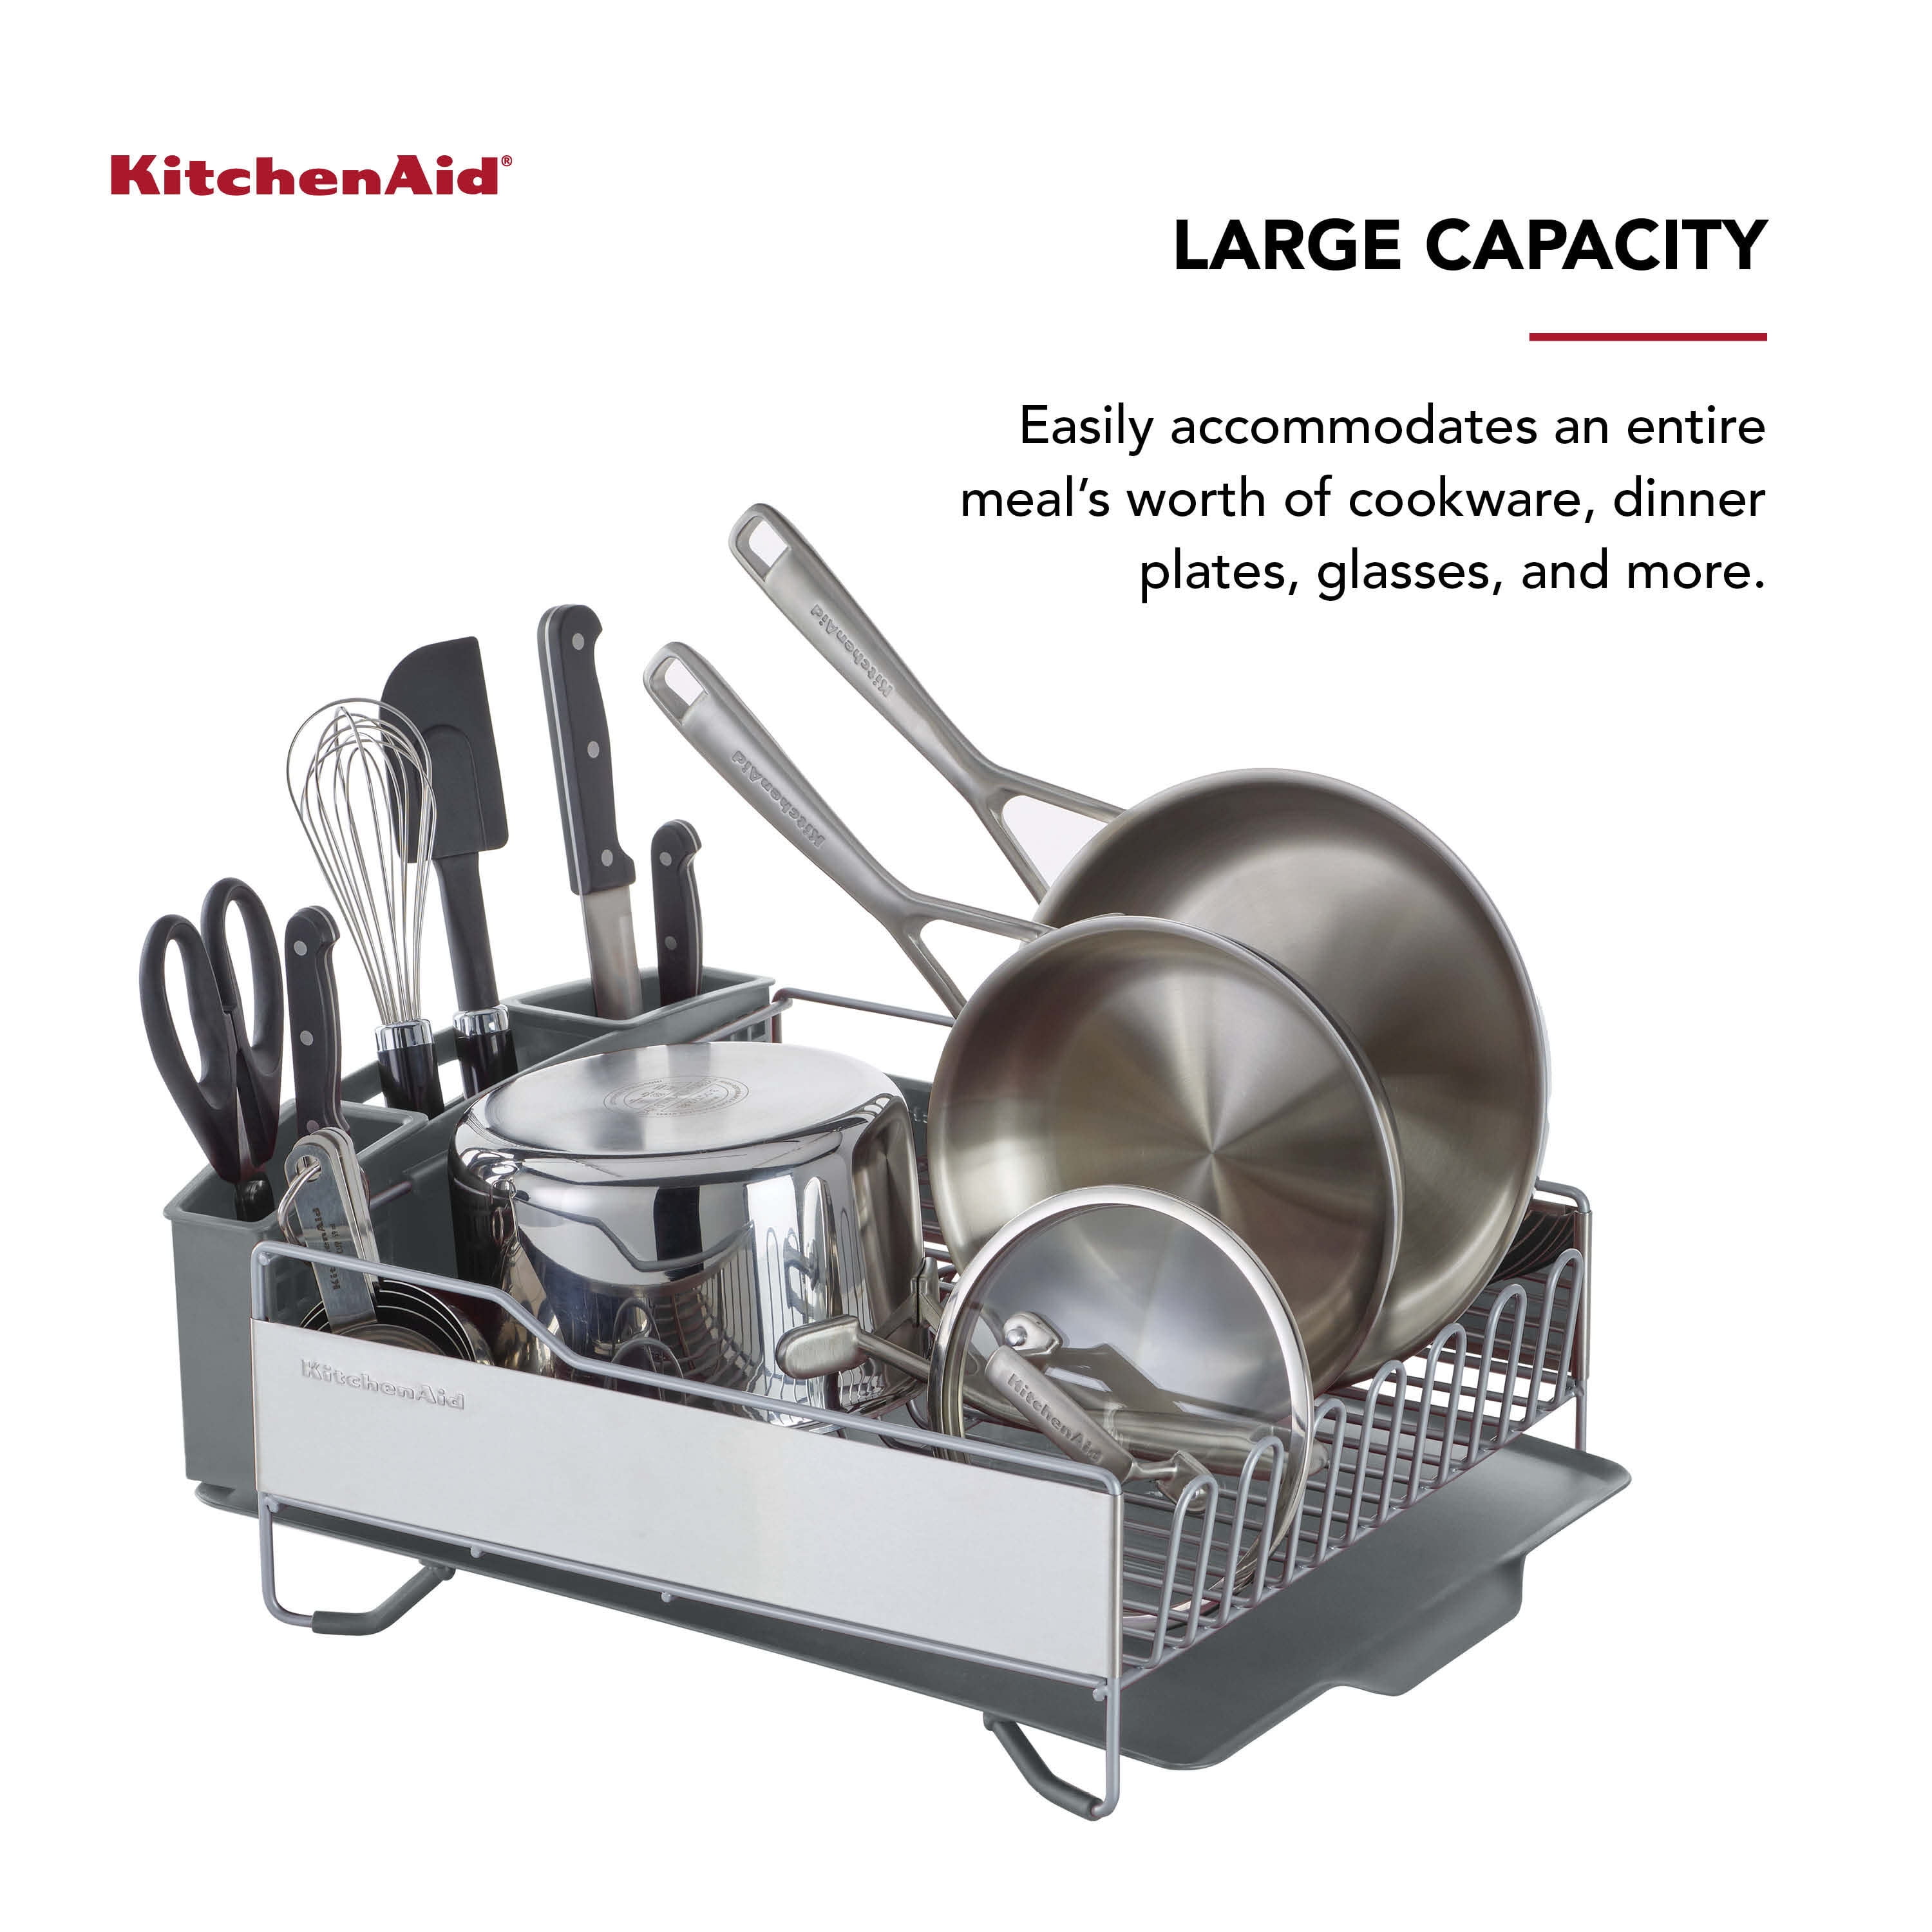  KitchenAid Full Size Dish Rack, Light Grey & OXO Good Grips  SimplyTear Paper Towel Holder - Stainless Steel: Home & Kitchen